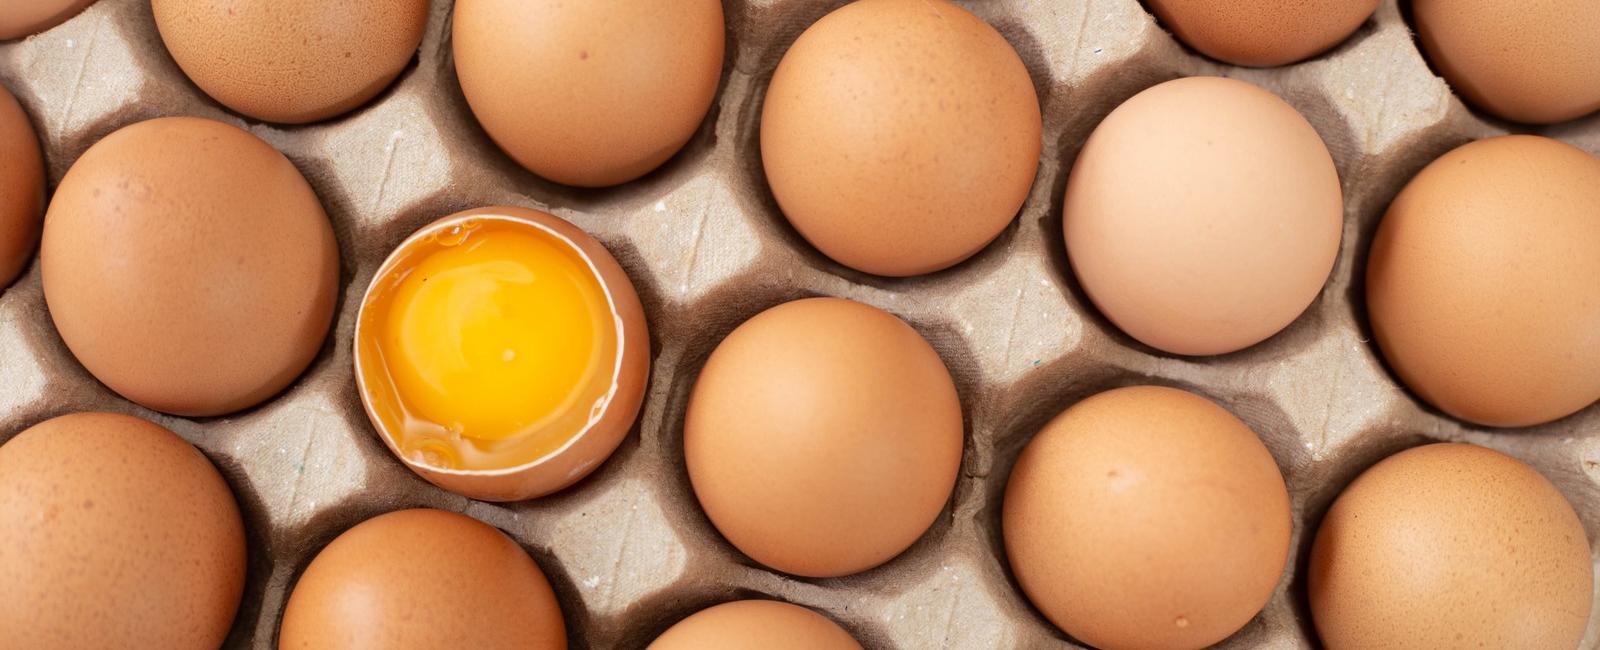 If you re an average american you eat as much as 279 eggs per year that many eggs equal 3 omelets or an egg ham and cheese sandwich consumed monday through friday